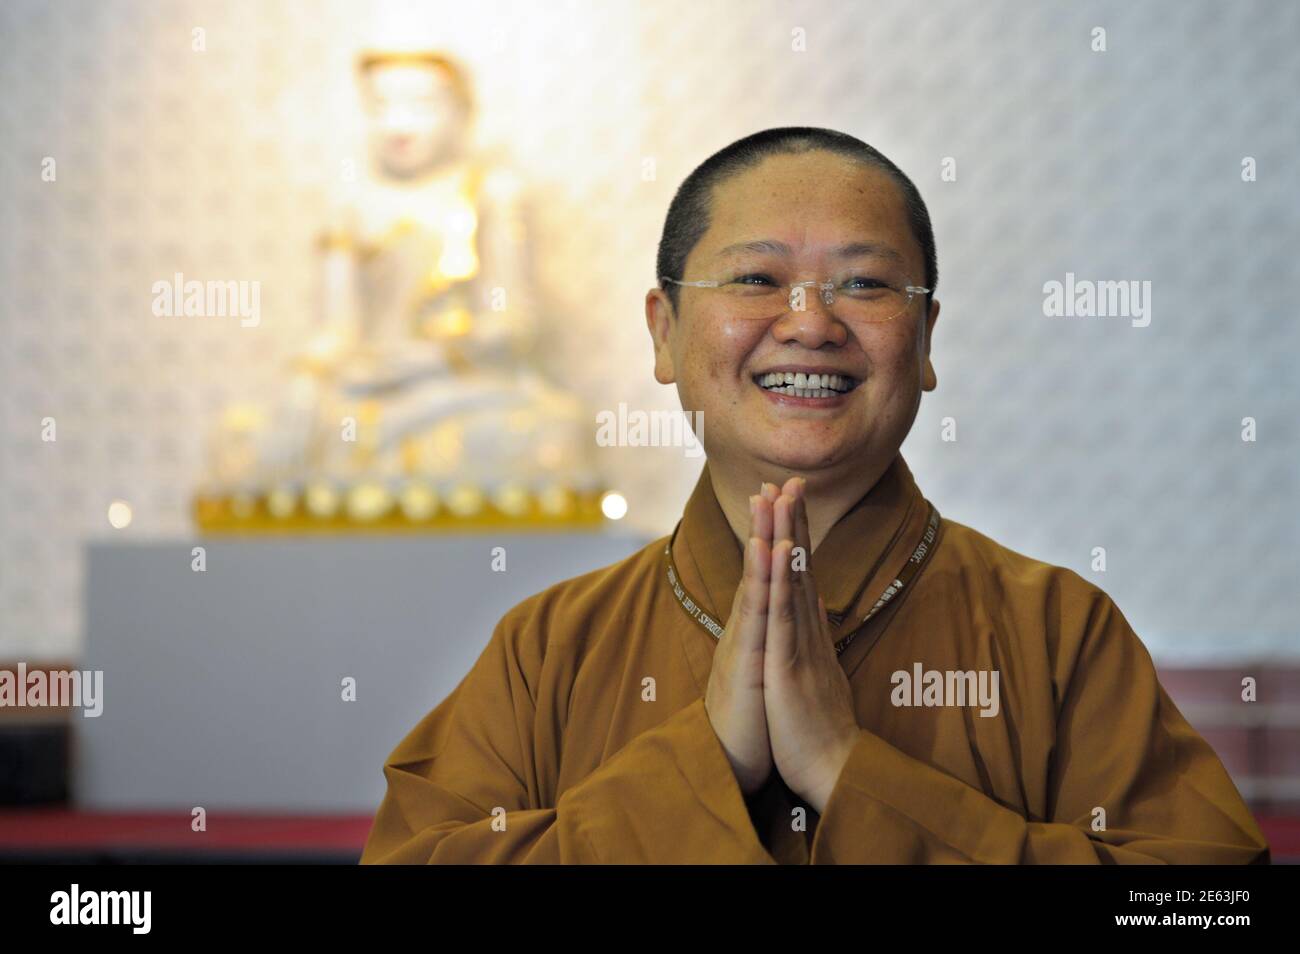 Venerable  Manchien Shih, who is in charge of the European Regional Temple, reacts at the temple in Bussy-Saint Georges, 30 km (19 miles) east of Paris June 21, 2012. The European Regional Temple, Europe's biggest Buddhist temple and the future European headquarters of the Taiwanese monastic order of Fo Guang Shan, resides in a neighbourhood, nicknamed ?the esplanade of religions? by the city?s mayor Hugues Rondeau, which is aimed at facilitating dialogue between different communities in the city. The temple, which has the capacity to host up to 1,100 devotees, will be inaugurated on Sunday be Stock Photo